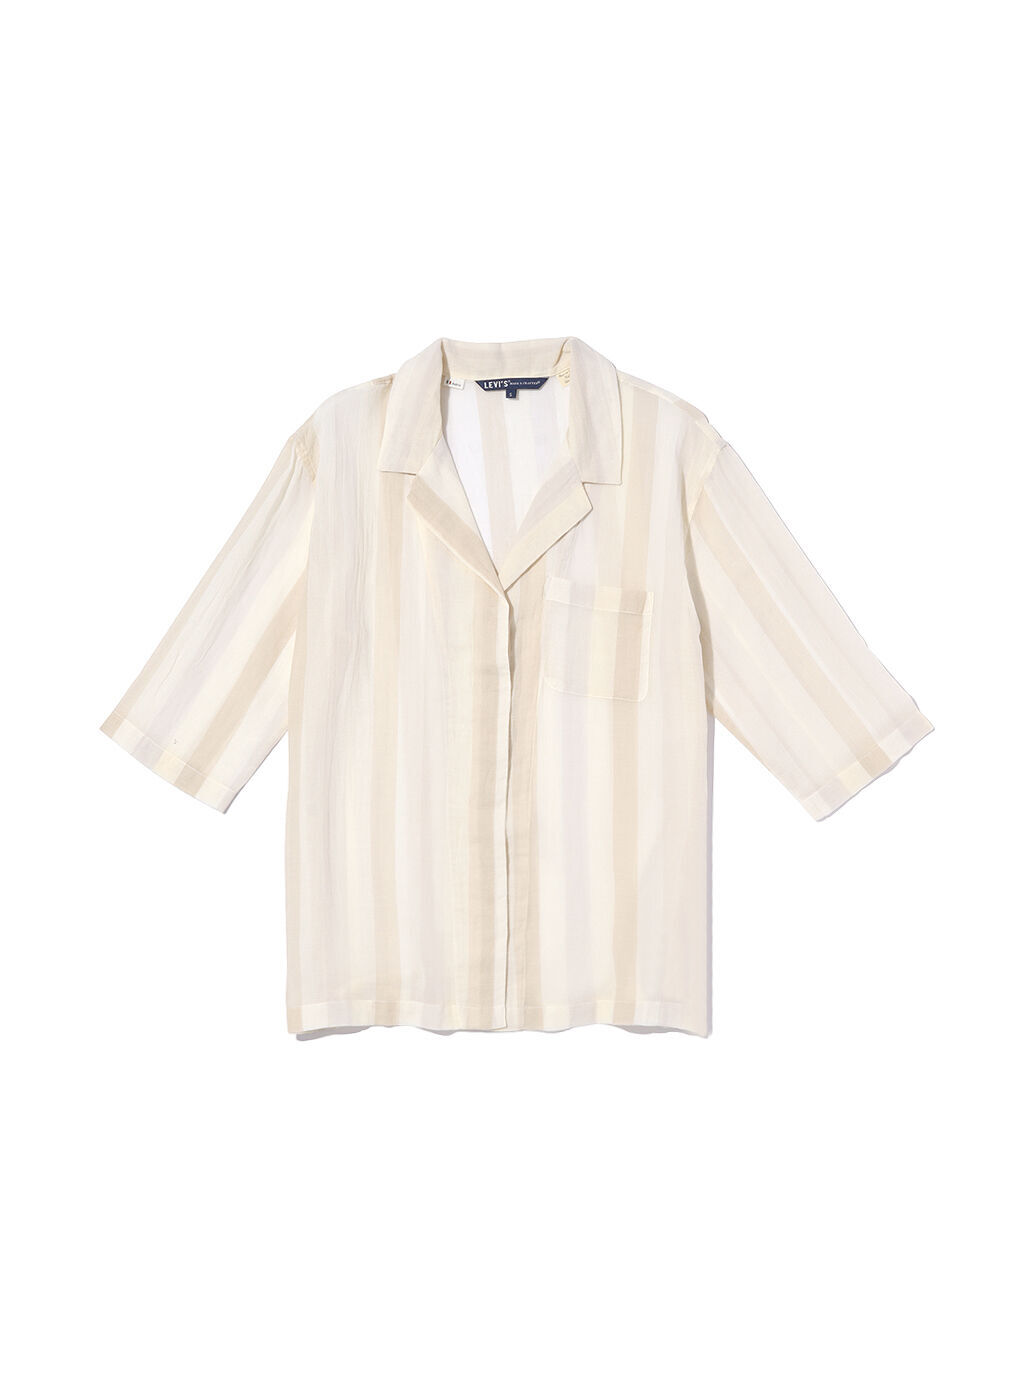 LEVI'S® MADE&CRAFTED®キャンプシャツ SUMMER NEUTRAL STRIPE